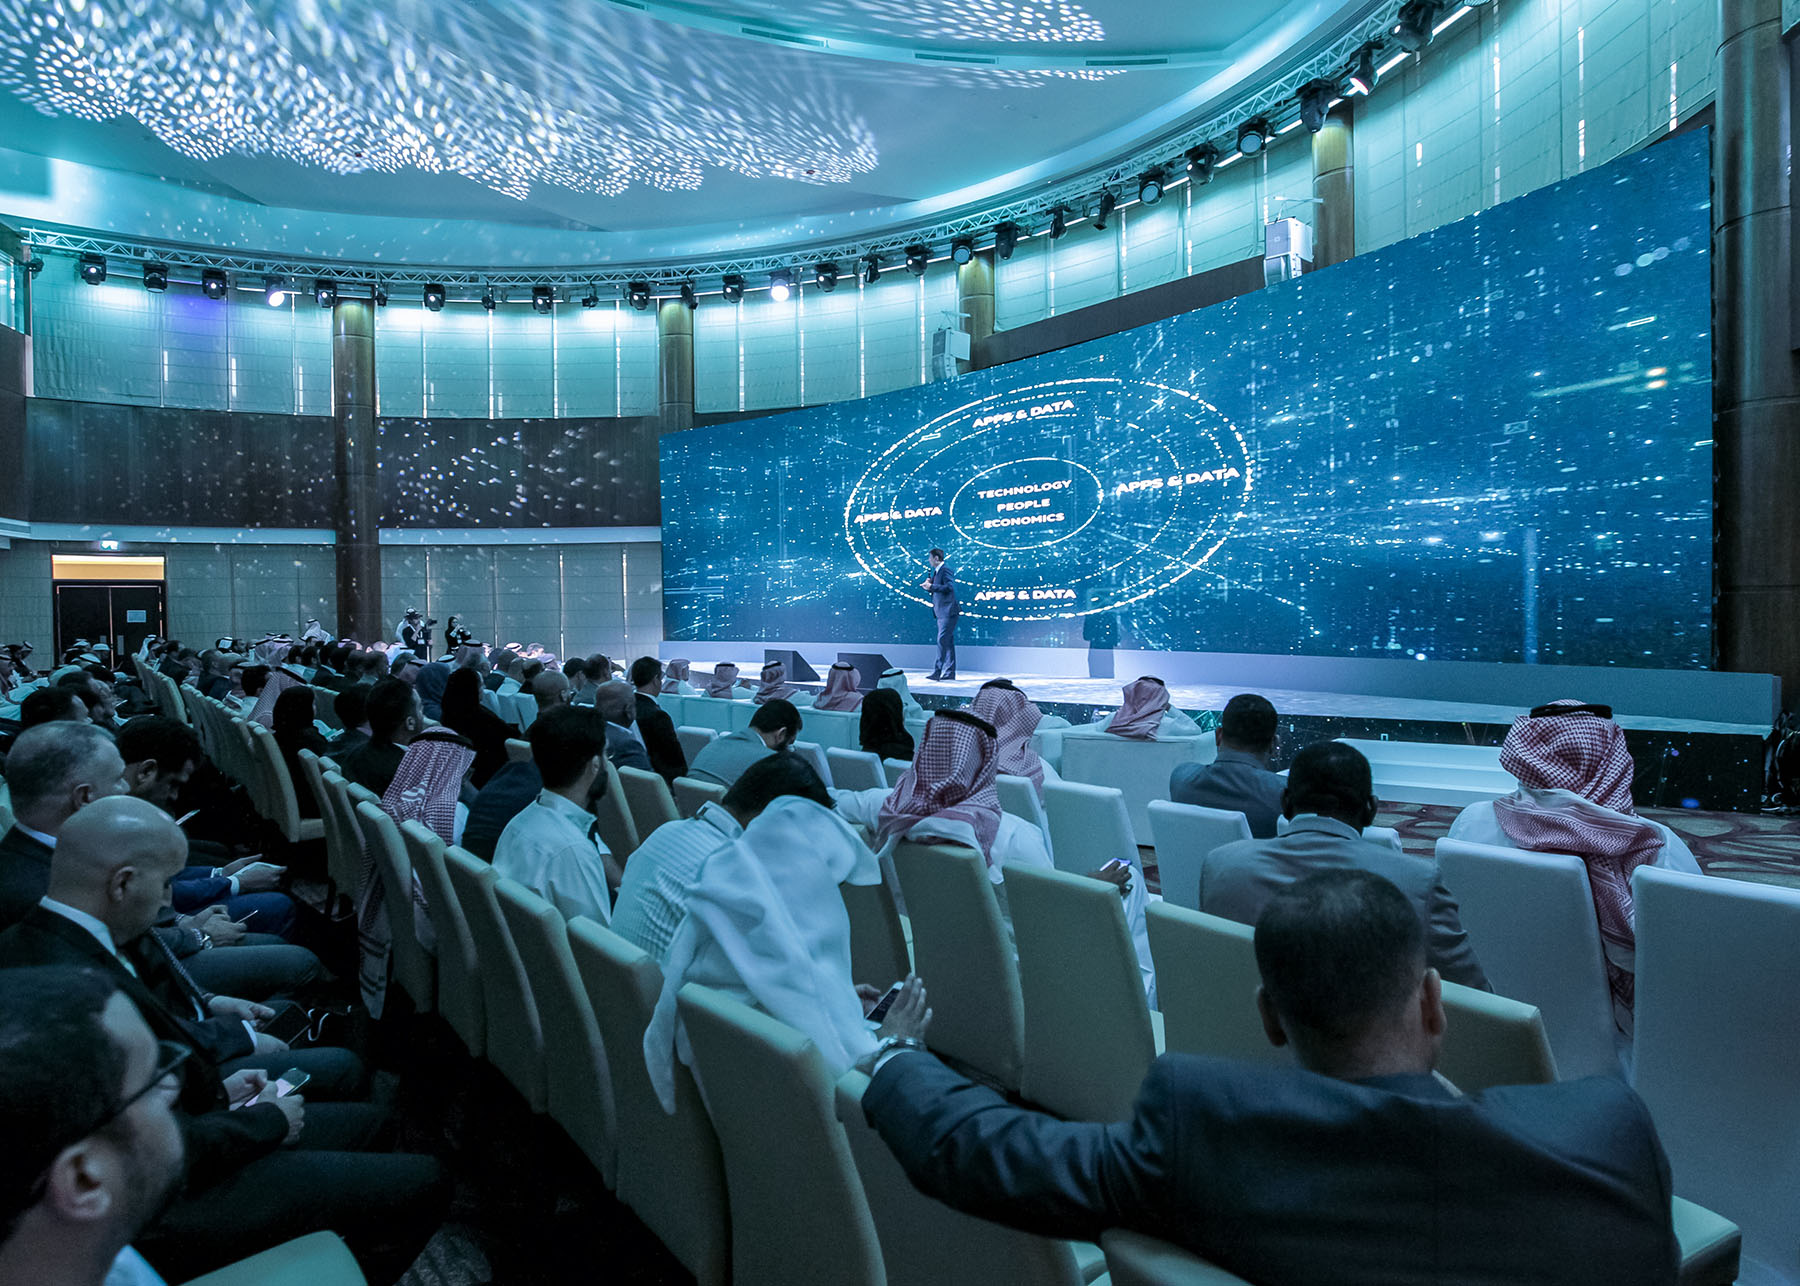 The immersive setting of the HPE event with the audience and speaker